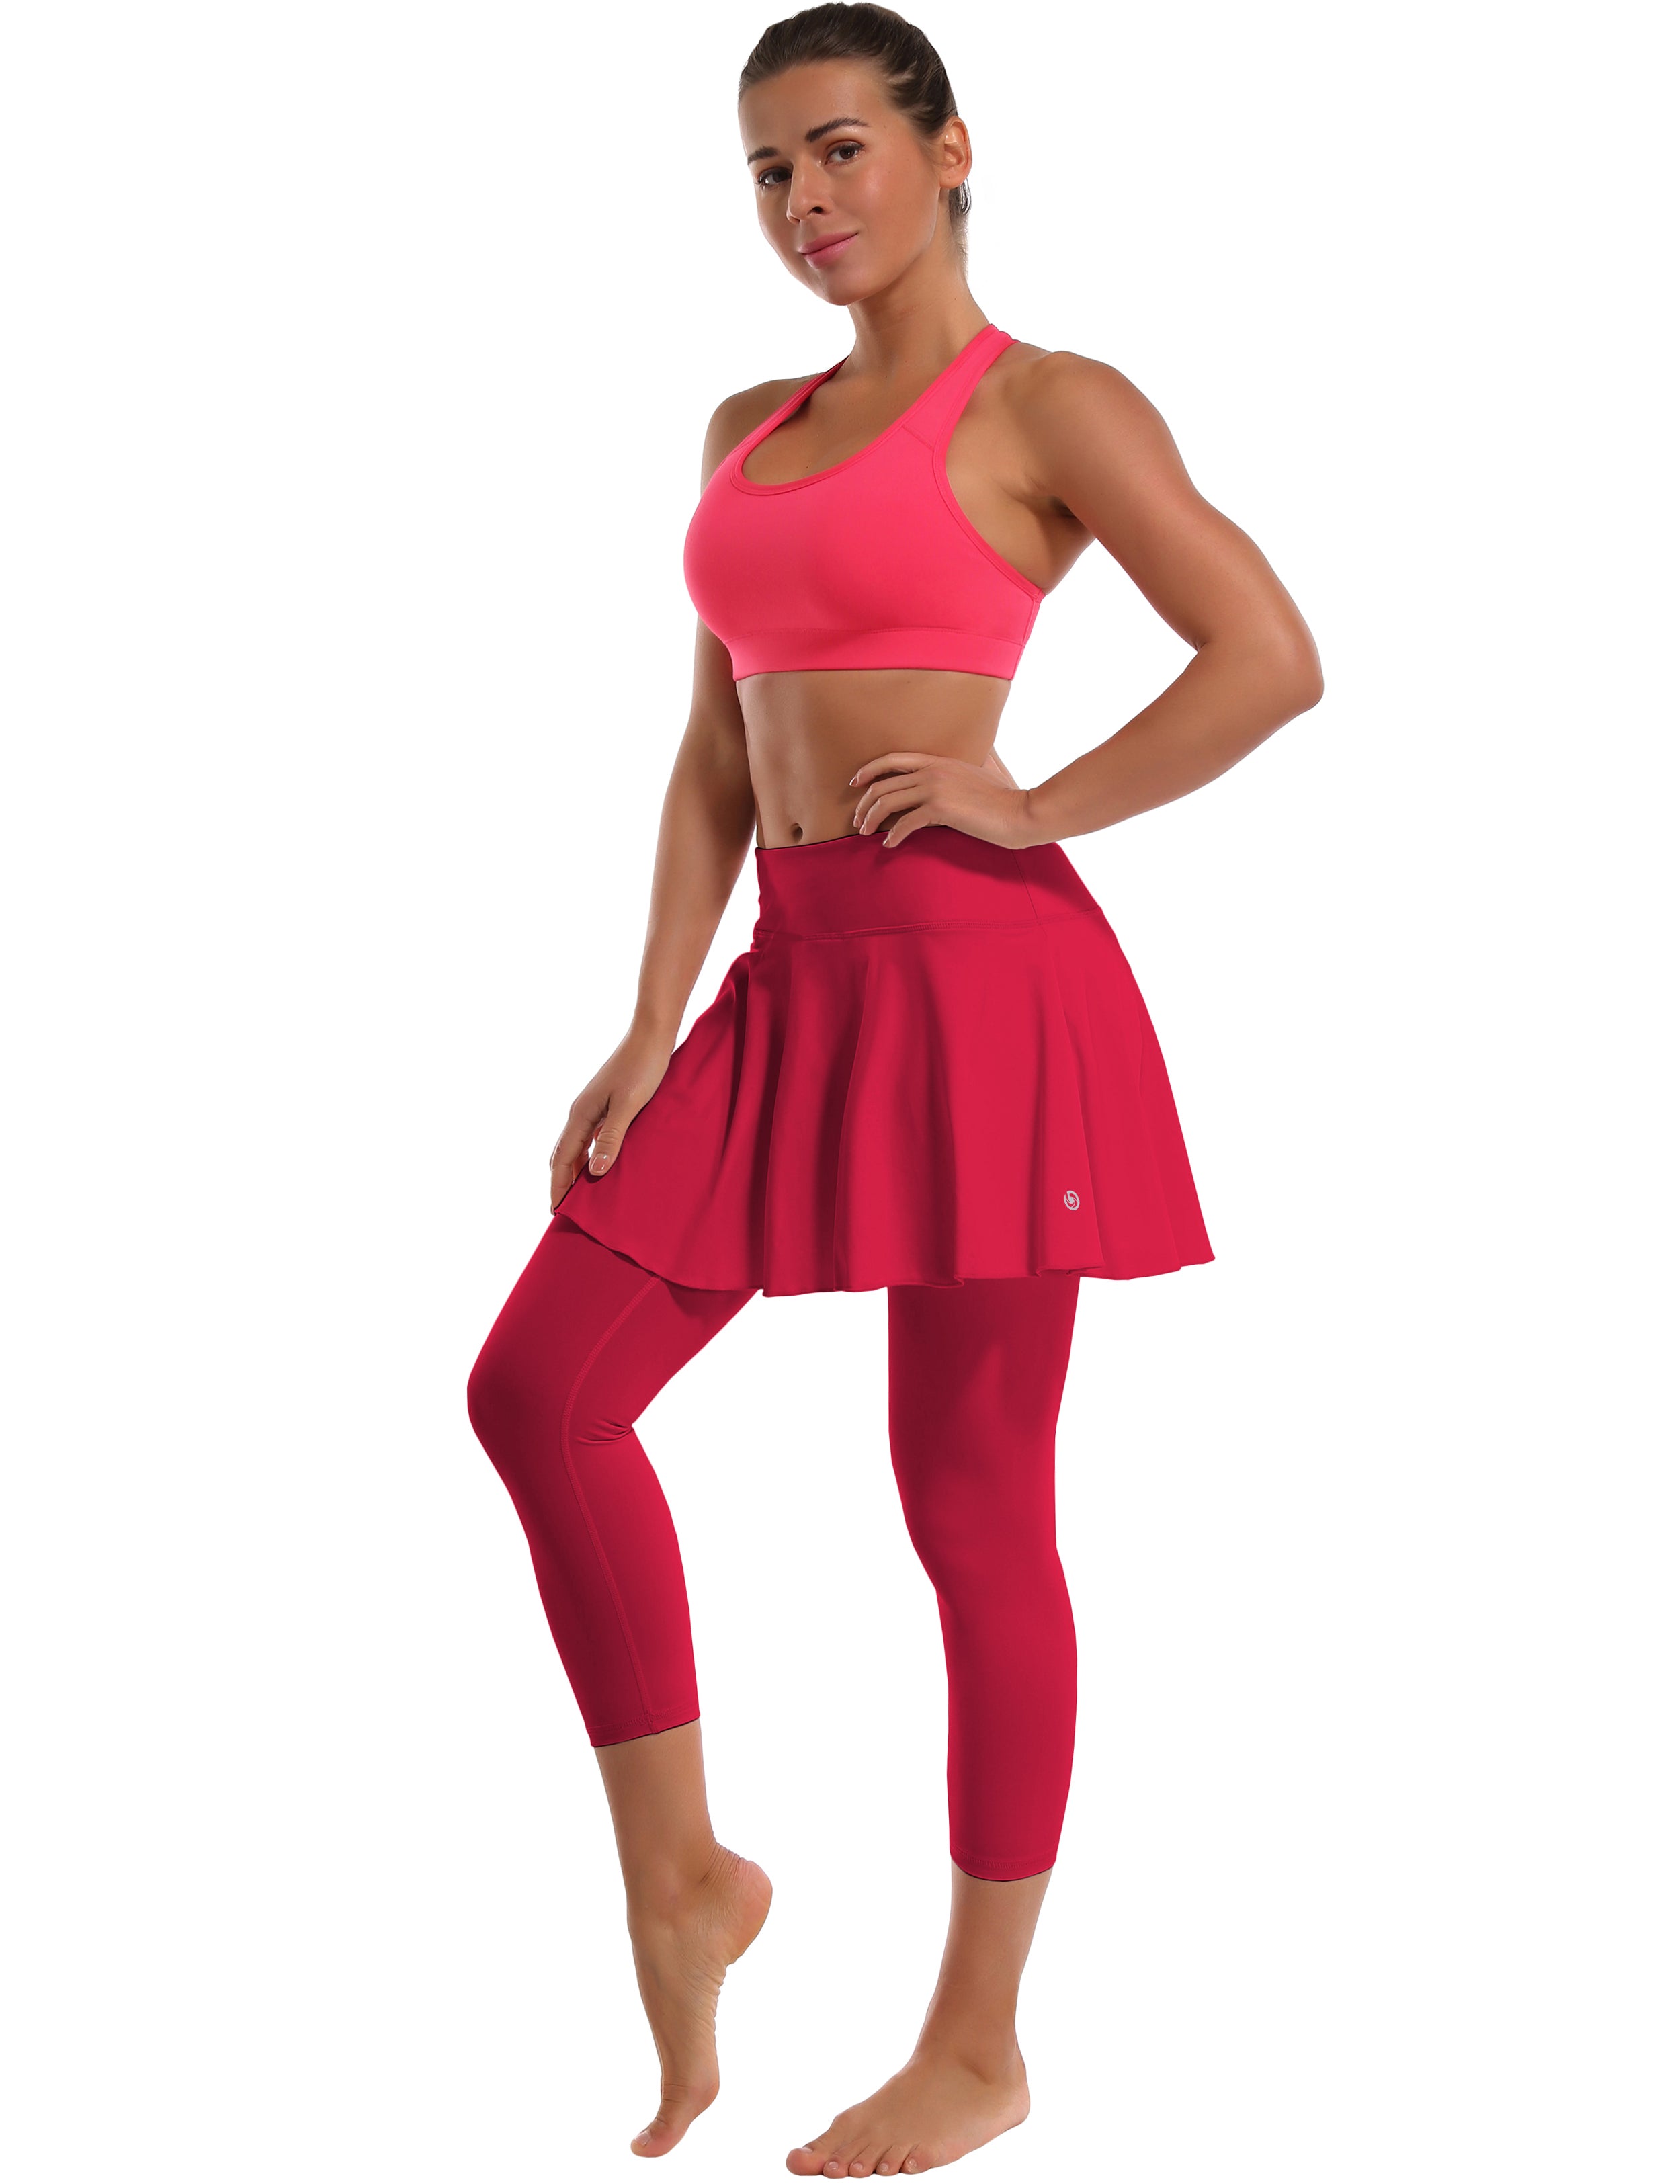 19" Capris Tennis Golf Skirted Leggings with Pockets rosecoral 80%Nylon/20%Spandex UPF 50+ sun protection Elastic closure Lightweight, Wrinkle Moisture wicking Quick drying Secure & comfortable two layer Hidden pocket